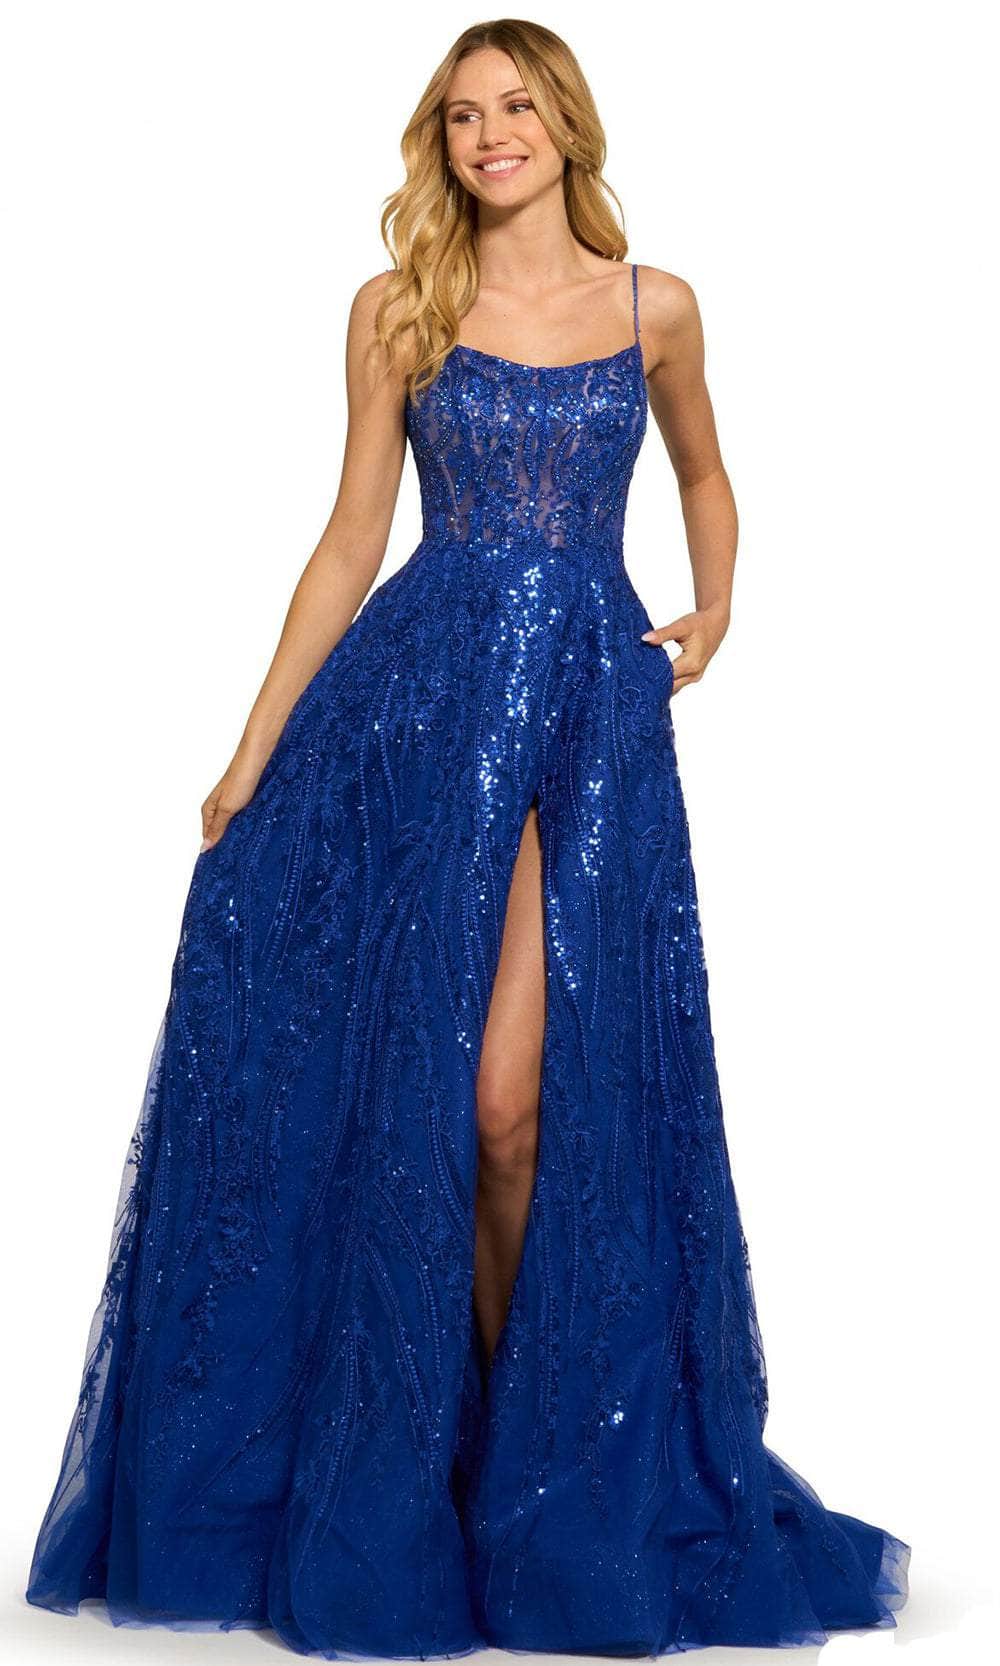 Image of Sherri Hill 55521 - Sequined A-Line Prom Dress